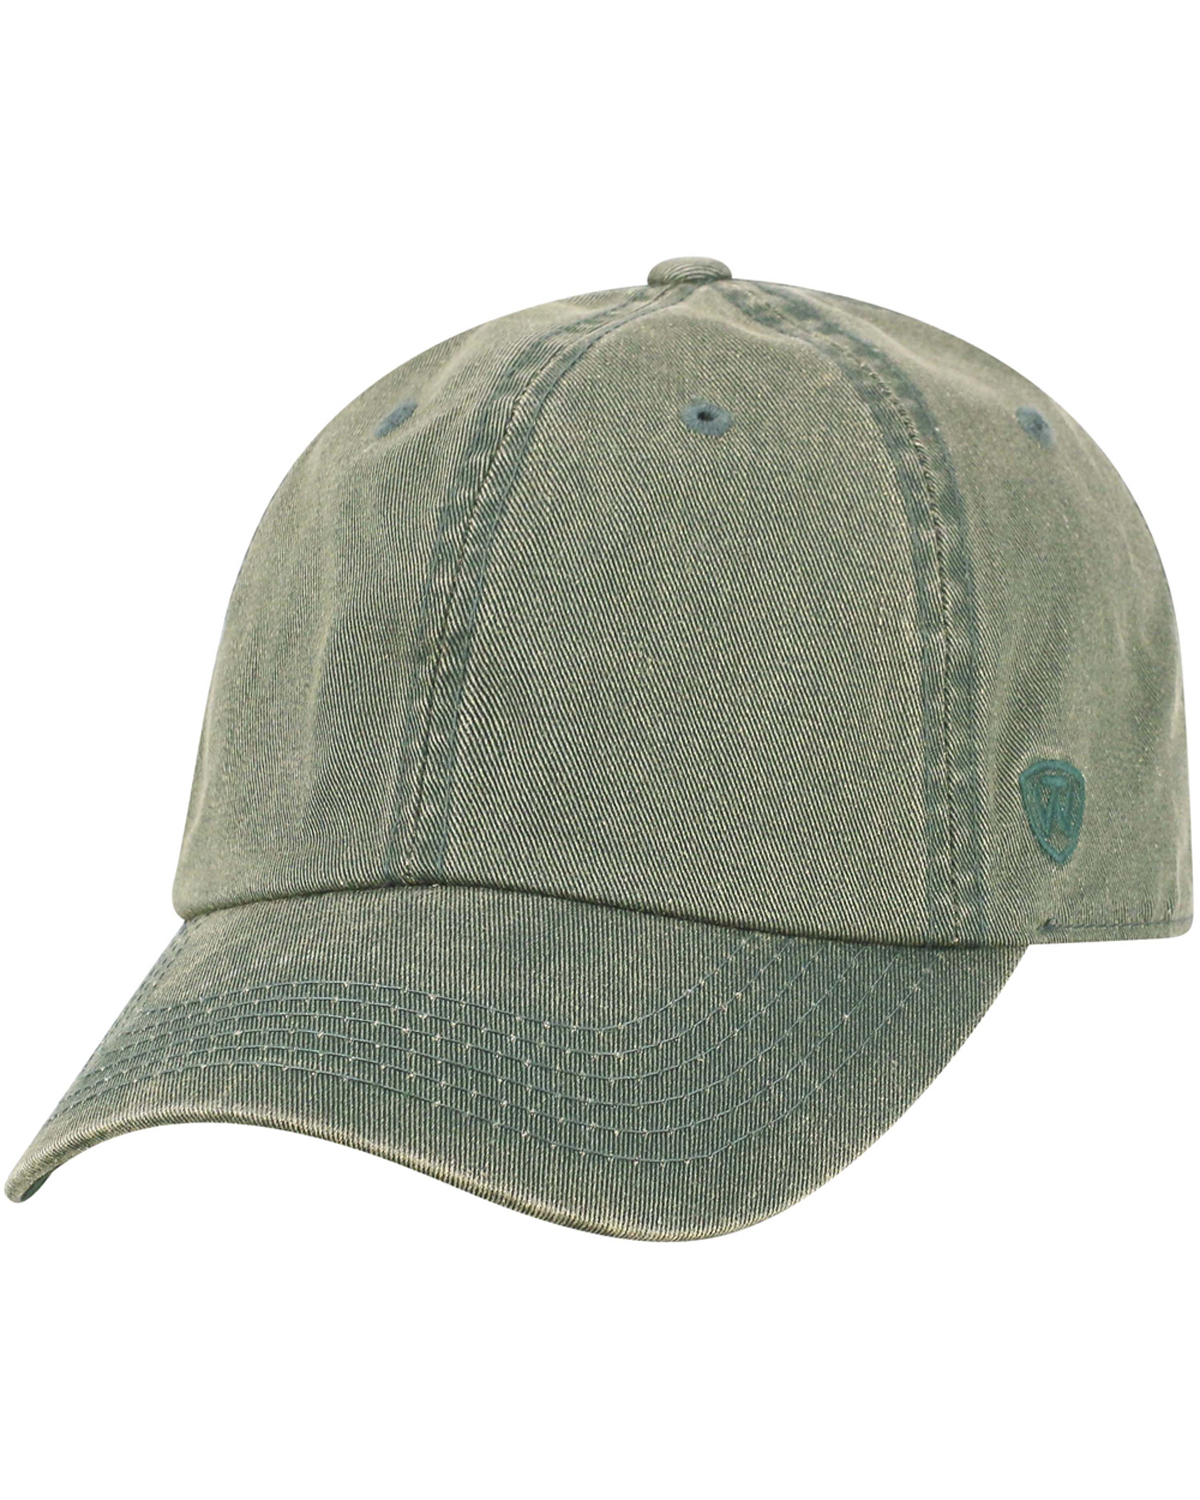 TW5516  Top Of The World Adult Park Cap